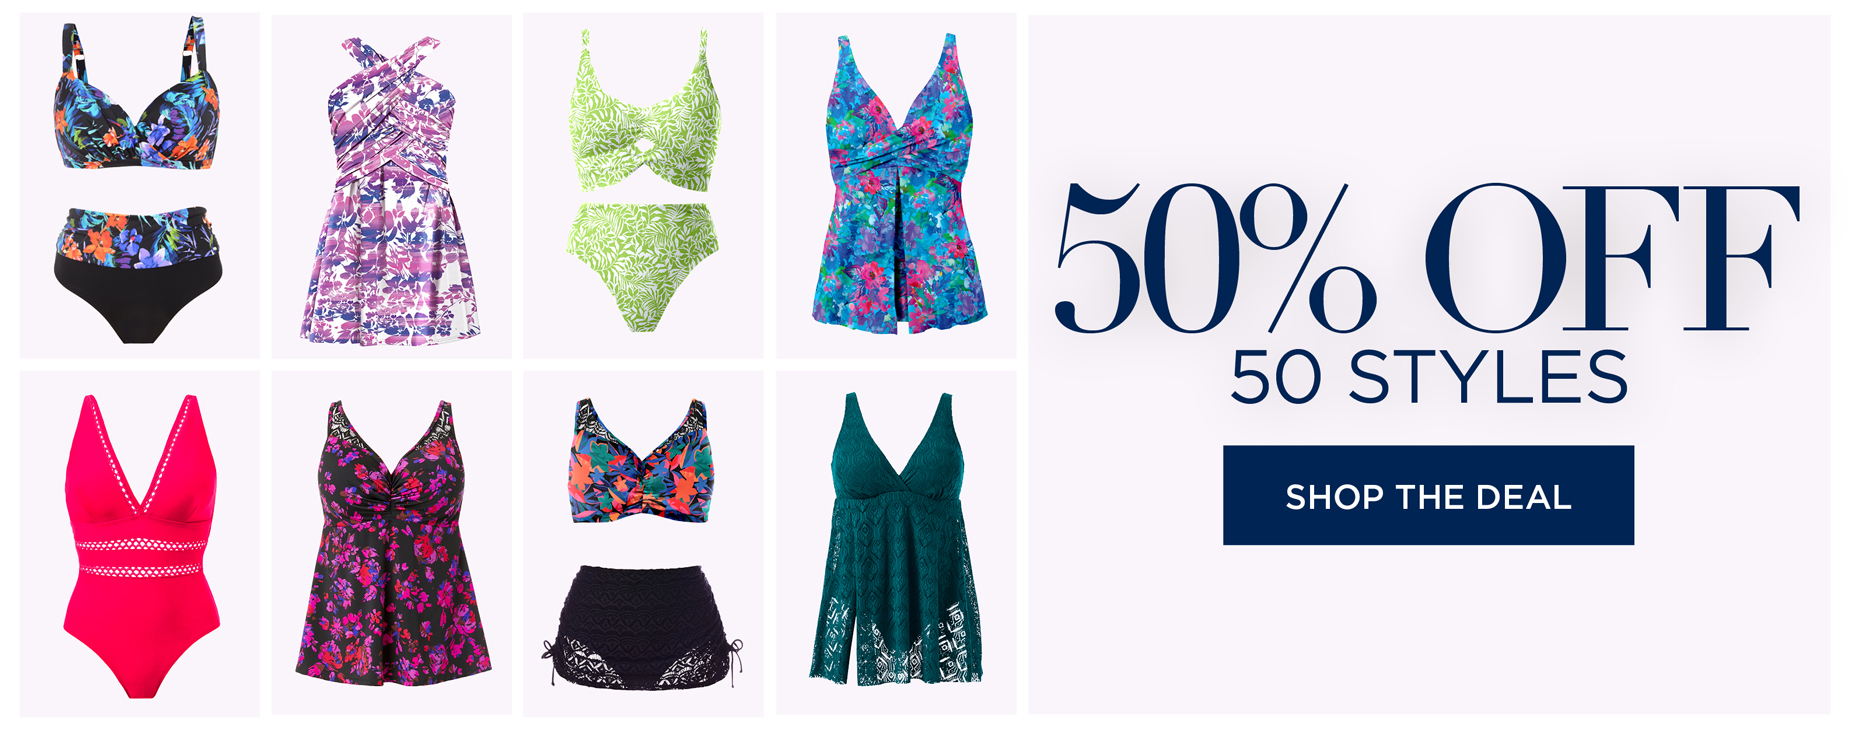 50% OFF 50 STYLES - SHOP NOW